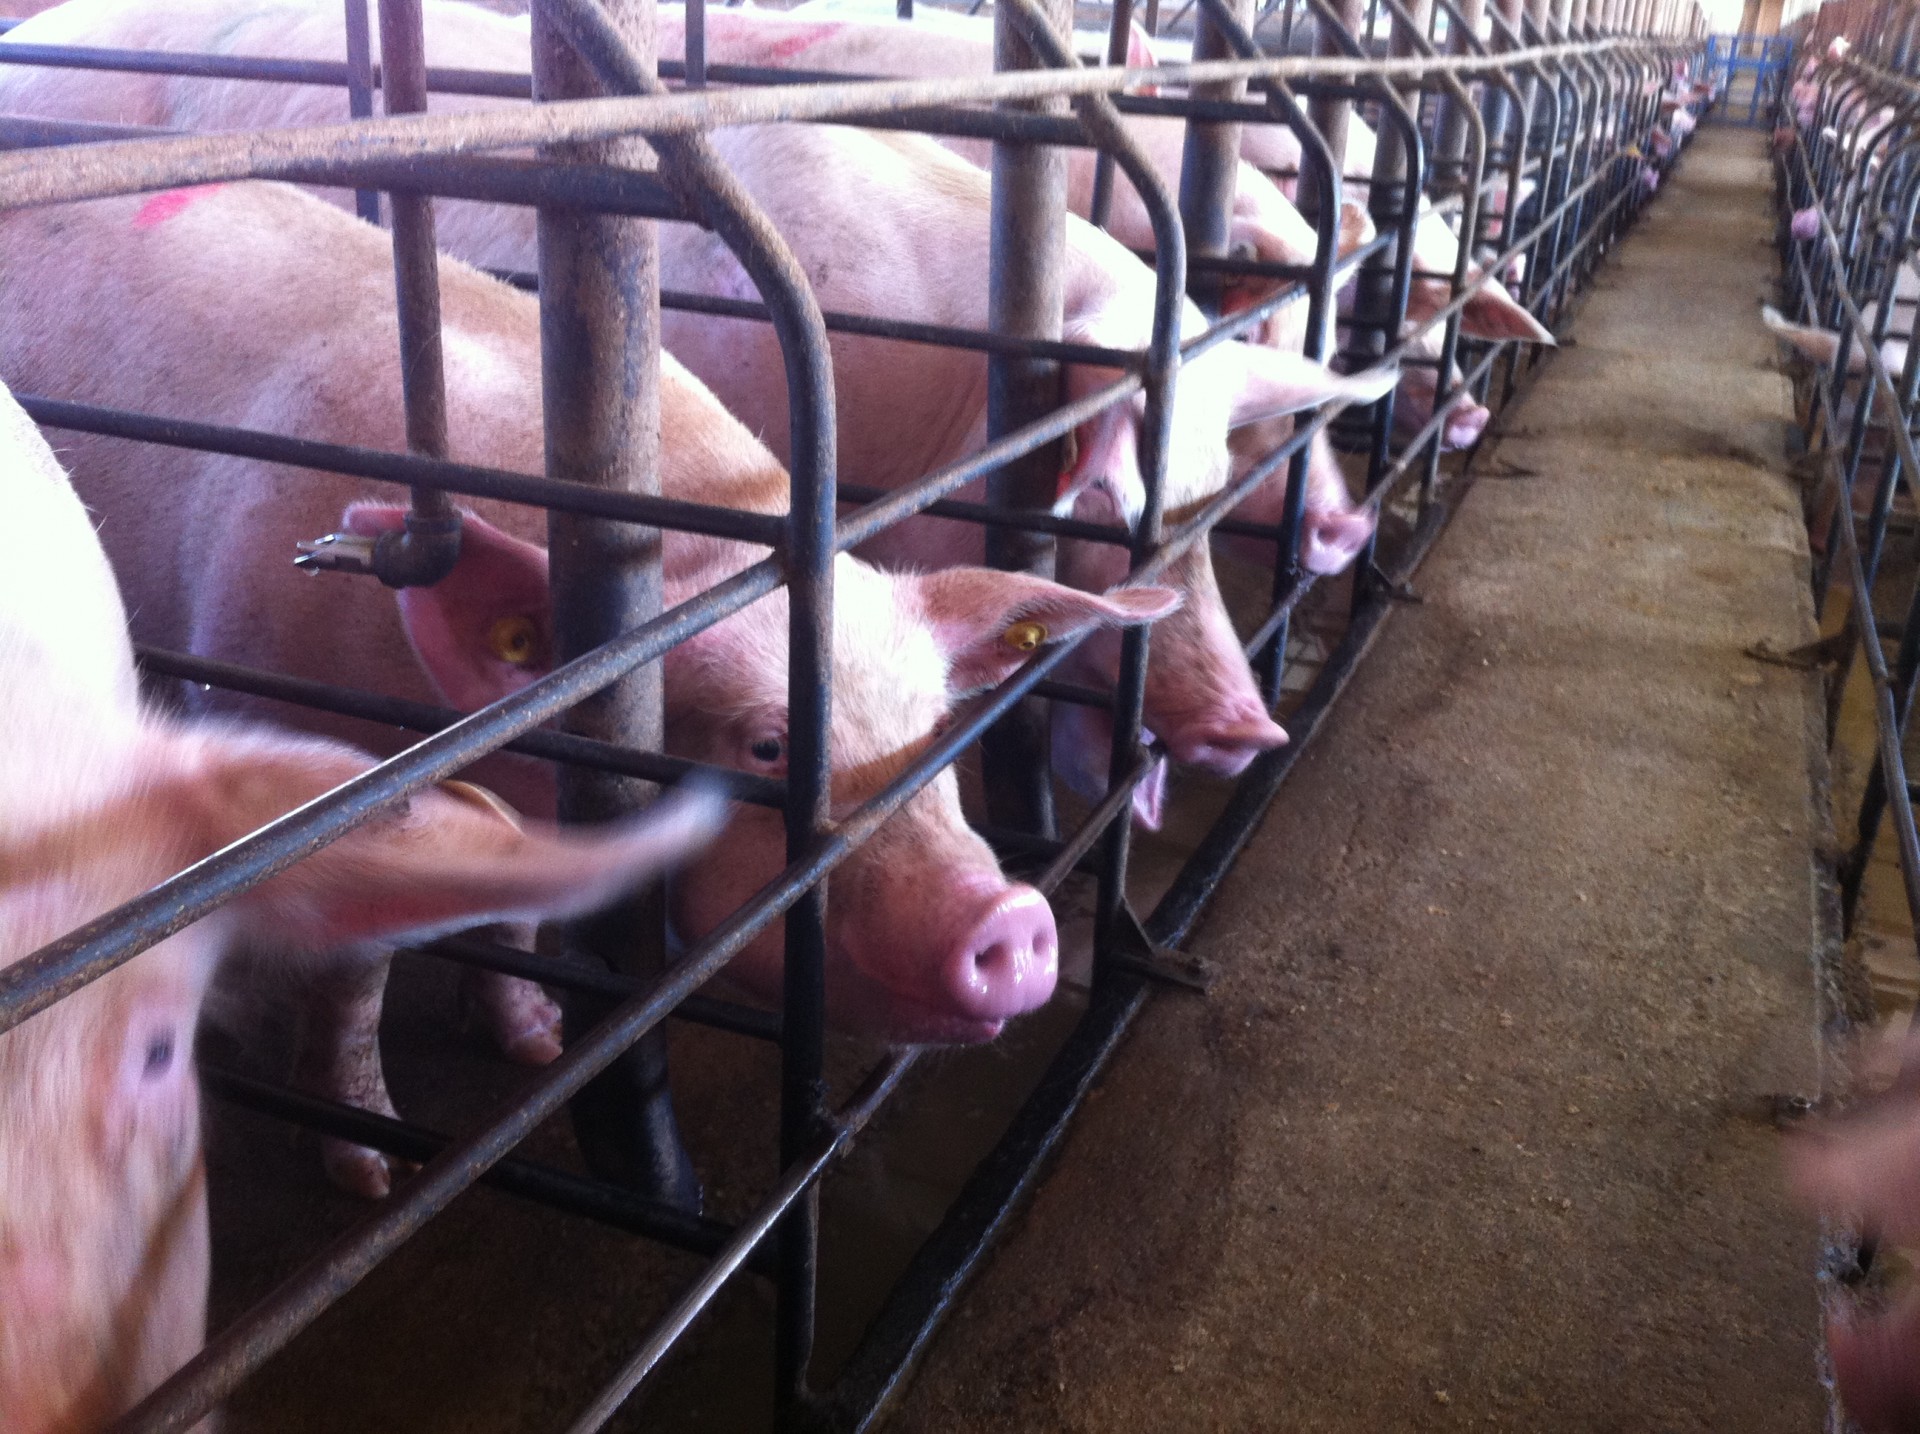 Brazil Joins Fight Against Cruel Gestation Crates